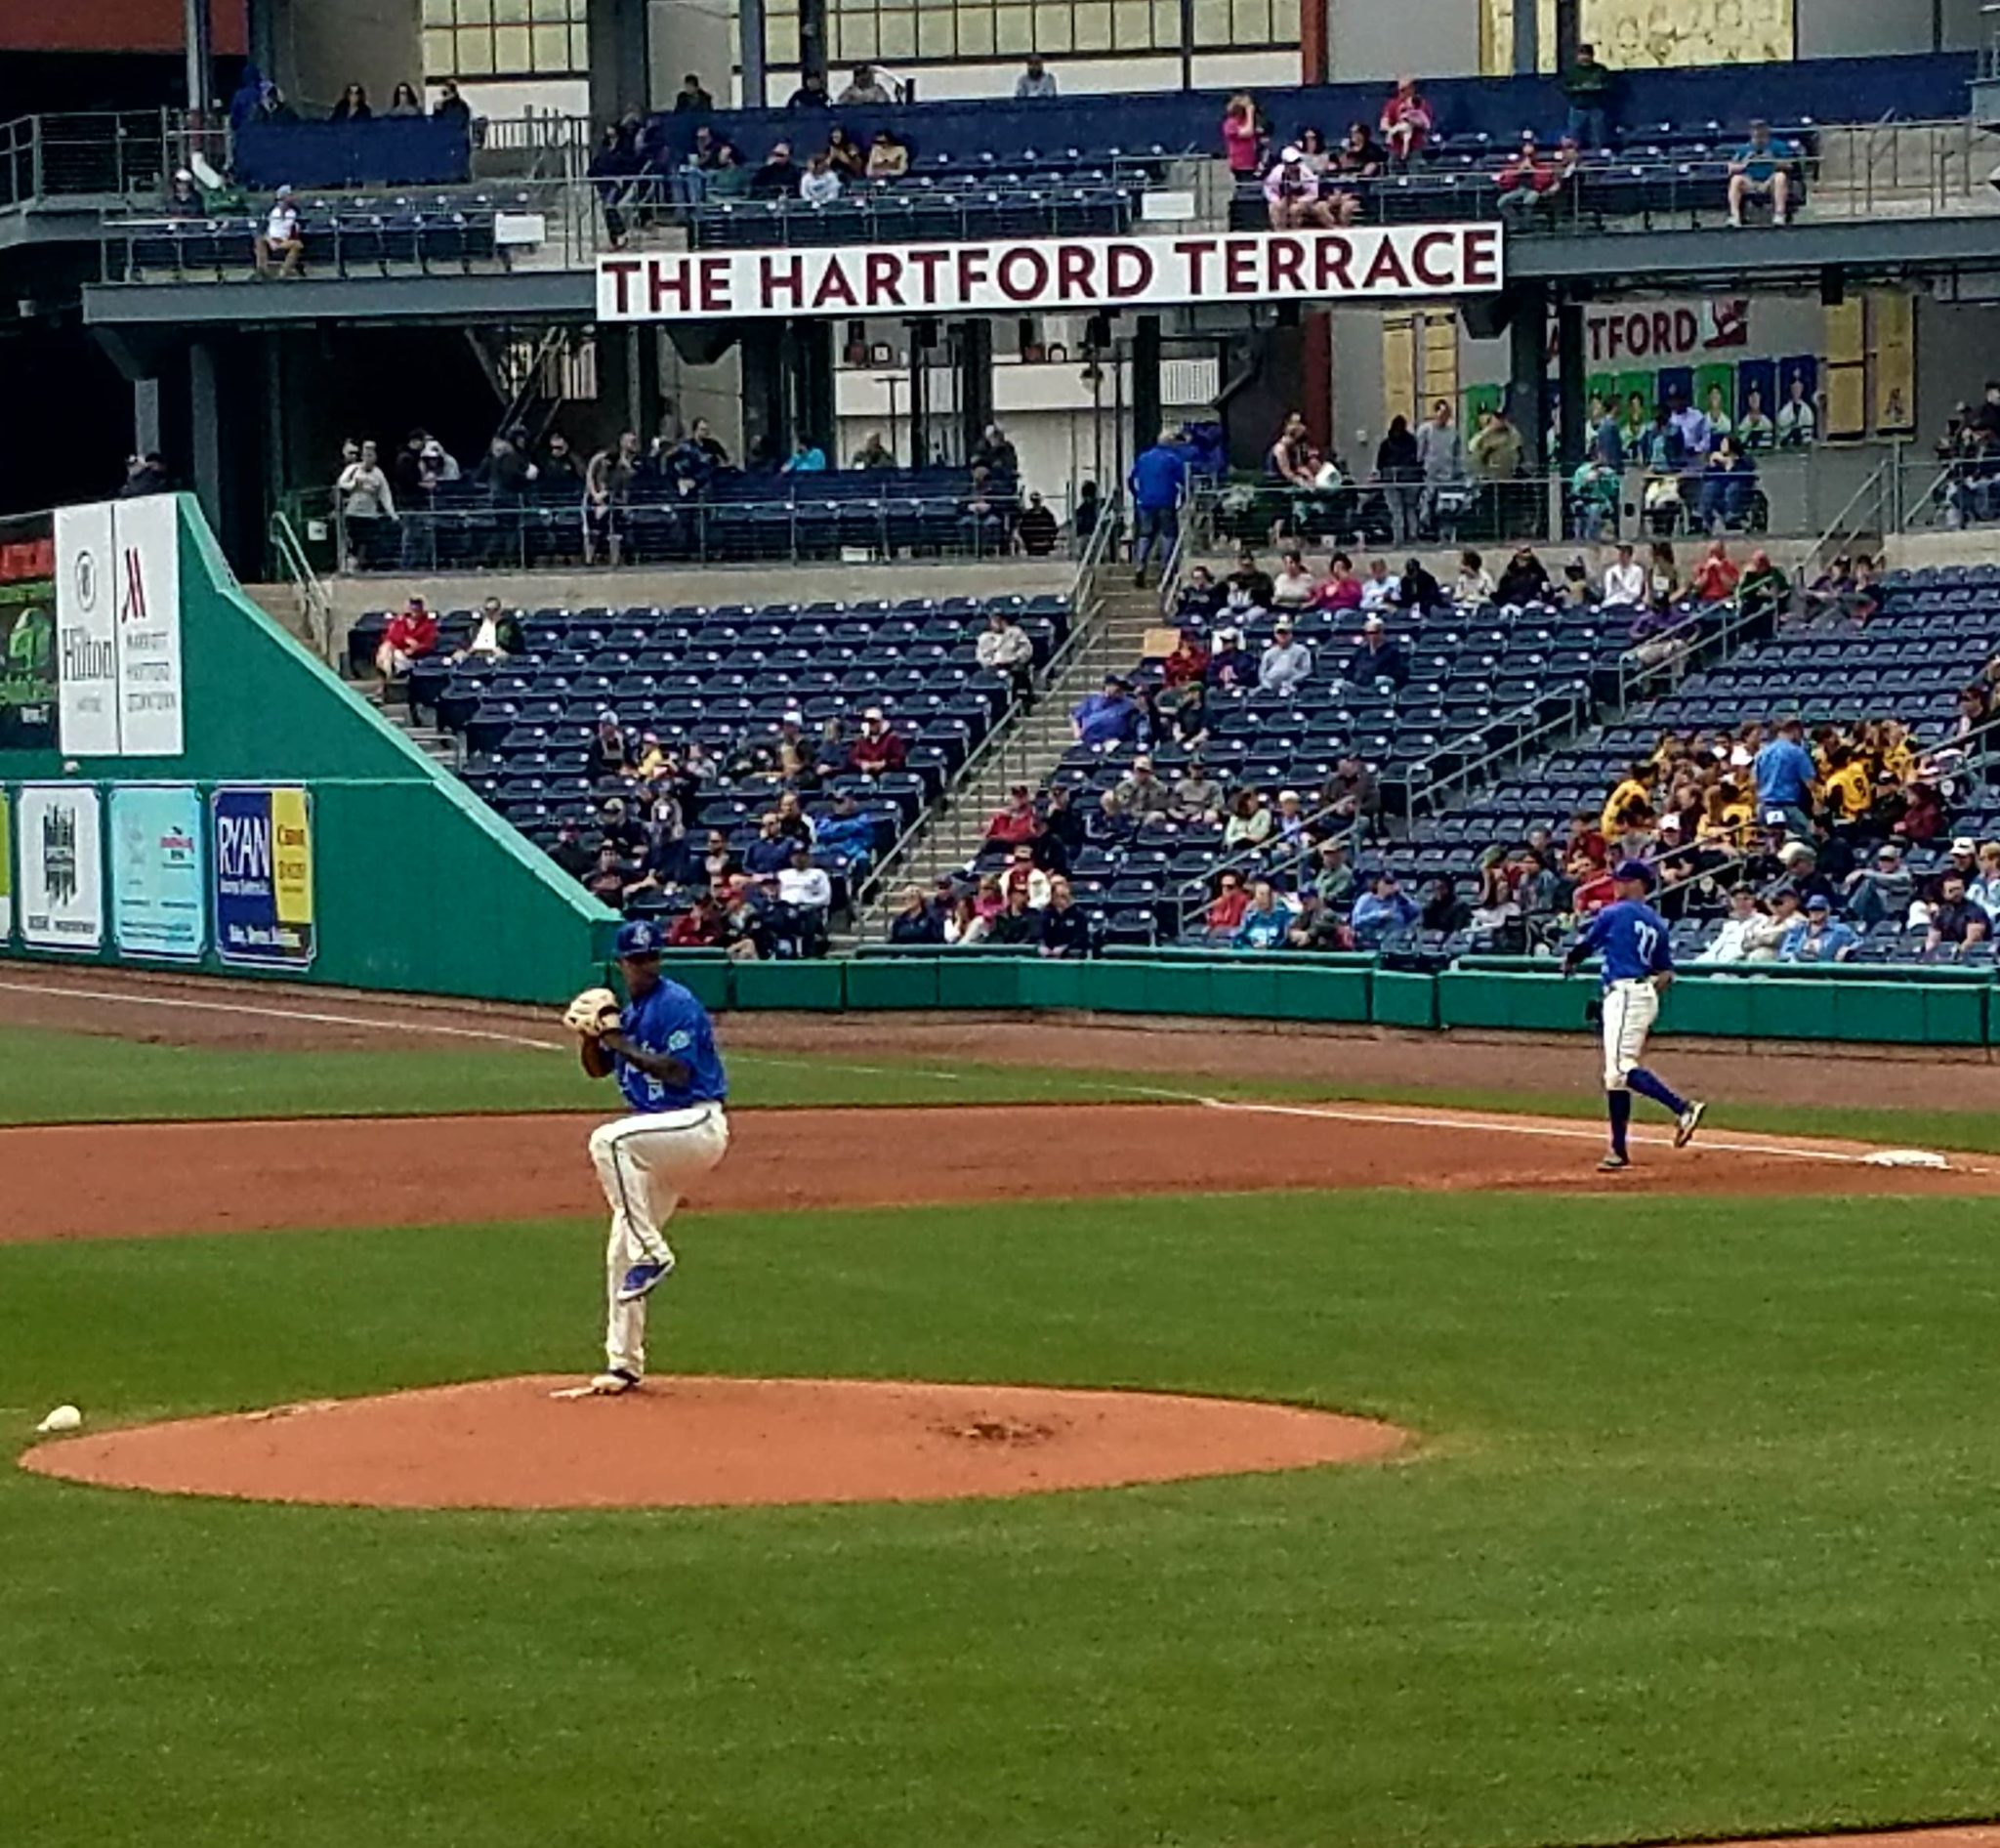 Yard Goats Baseball - Anything & Everything Can Happen!